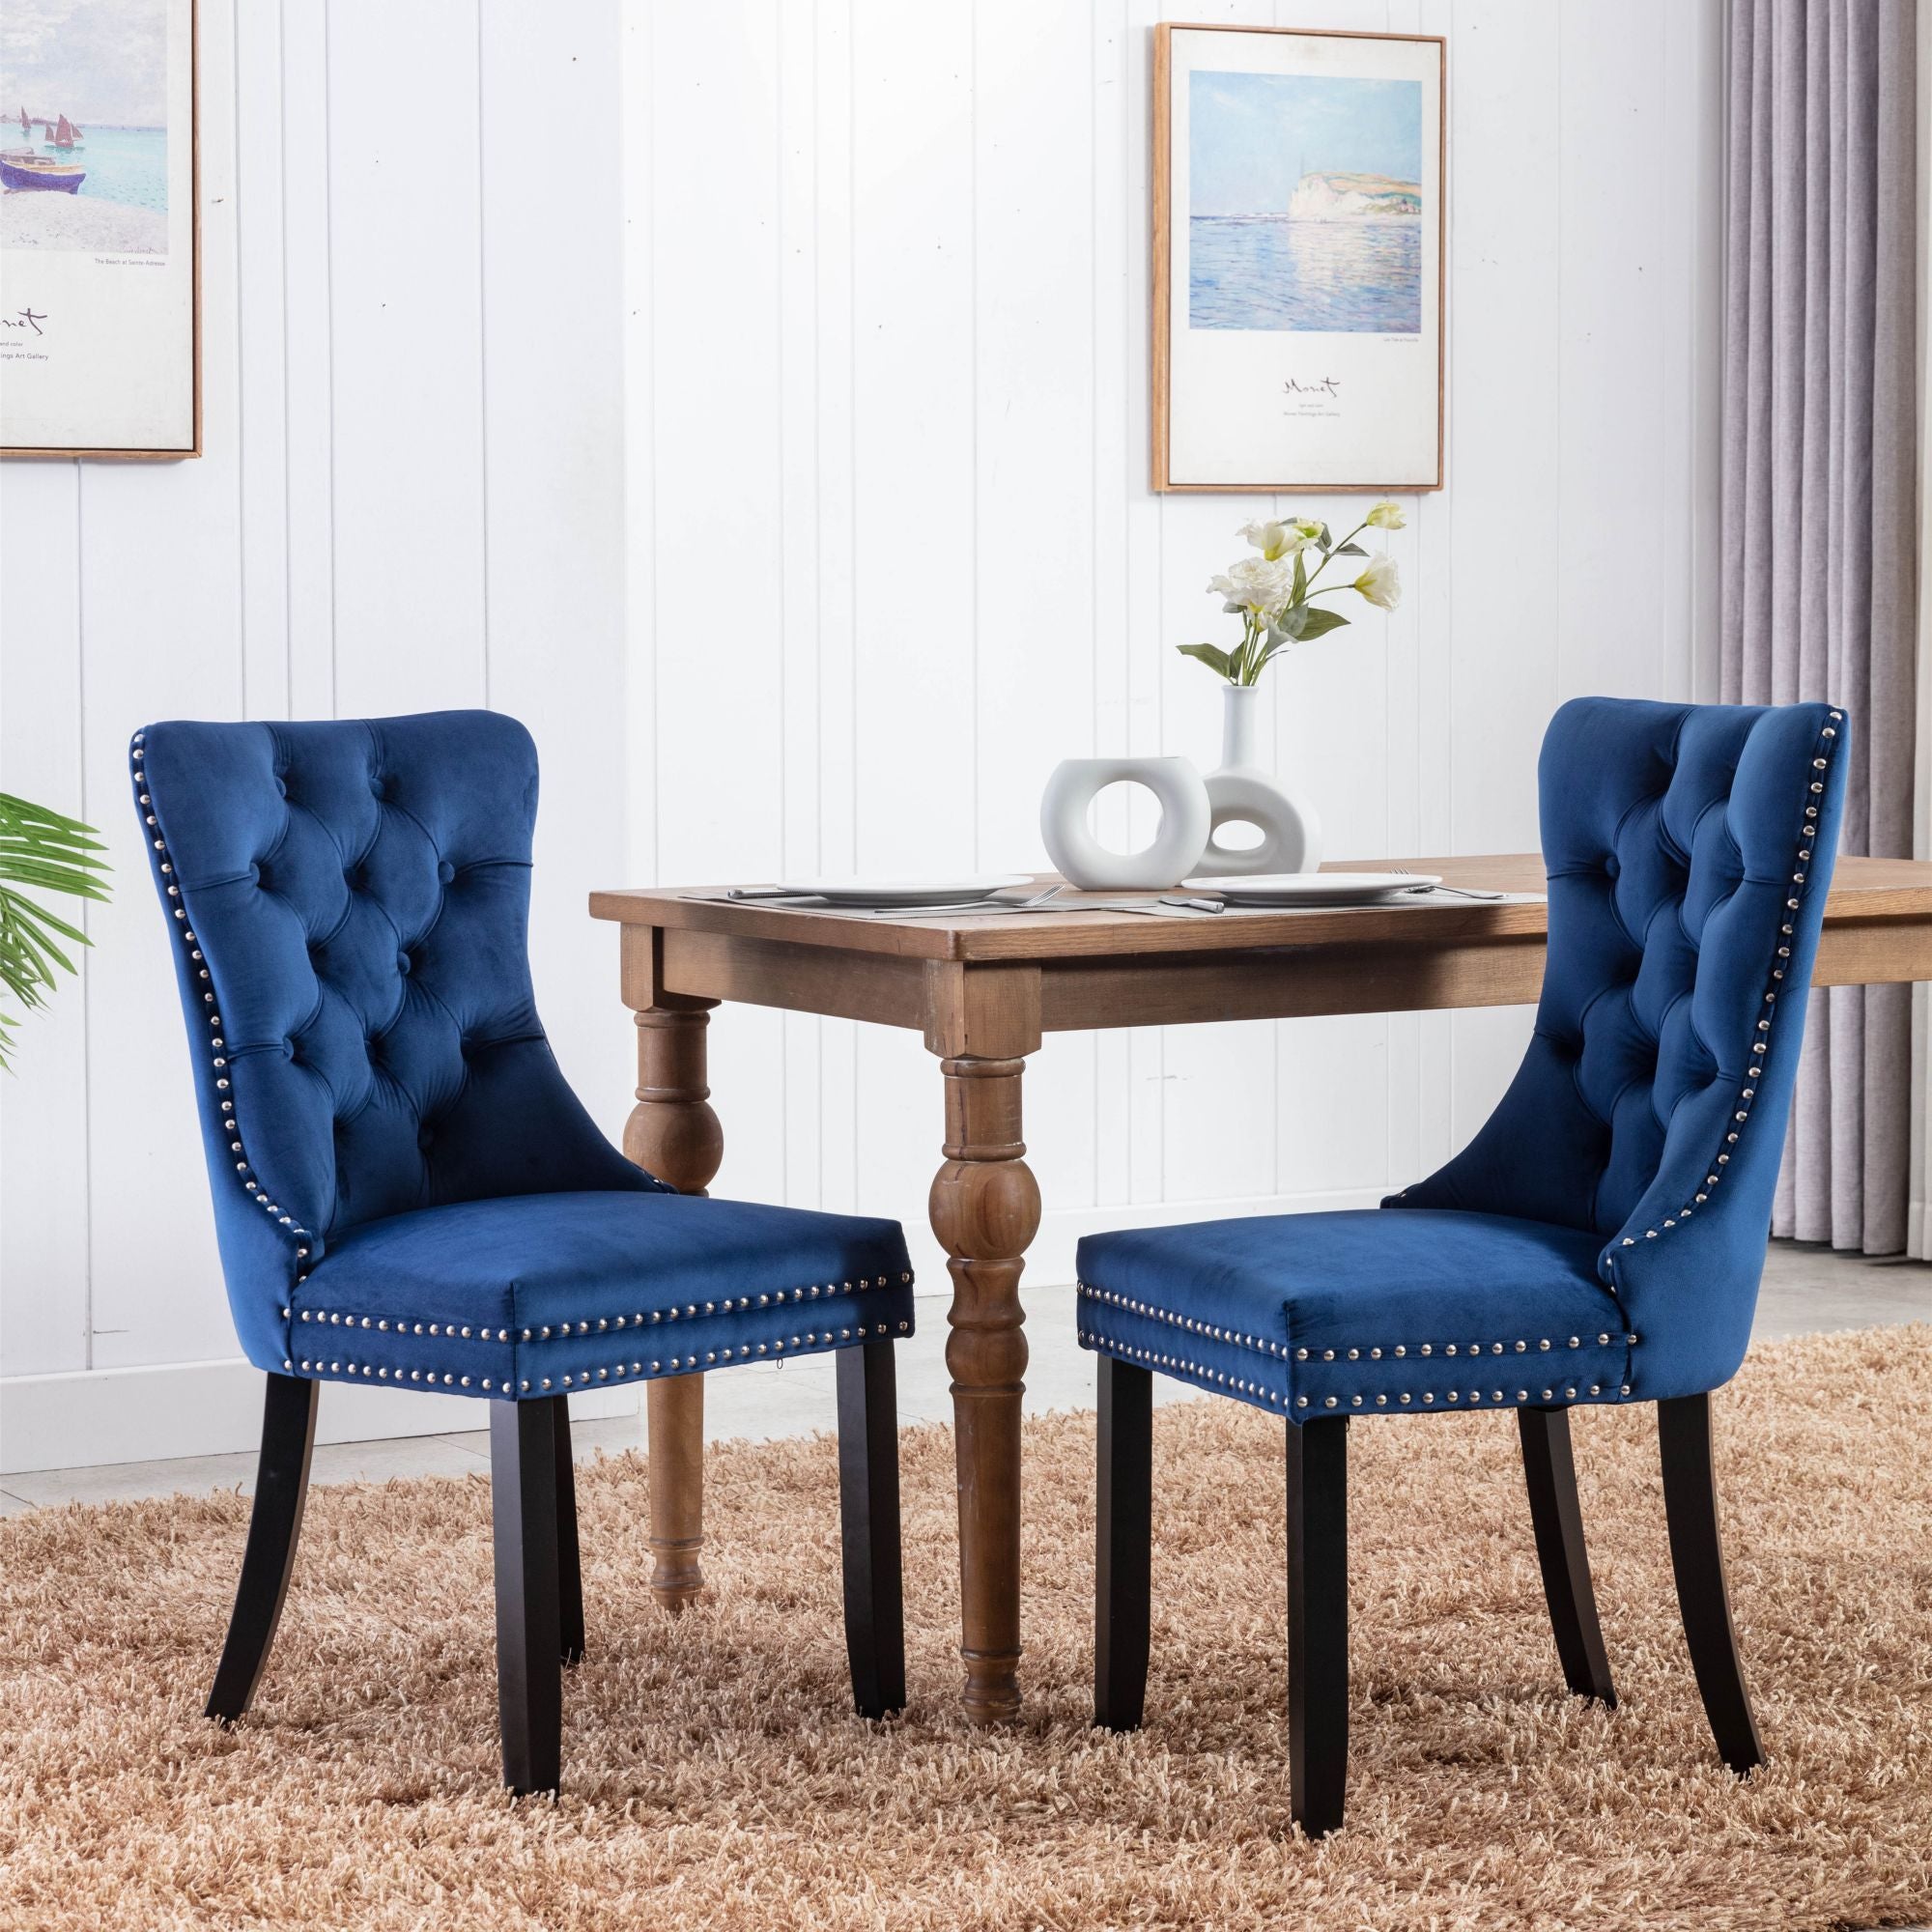 Contemporary Velvet Upholstered Dining Chair with High-end Tufted Solid Wood Legs Nail-head Trim 2-Pcs Set